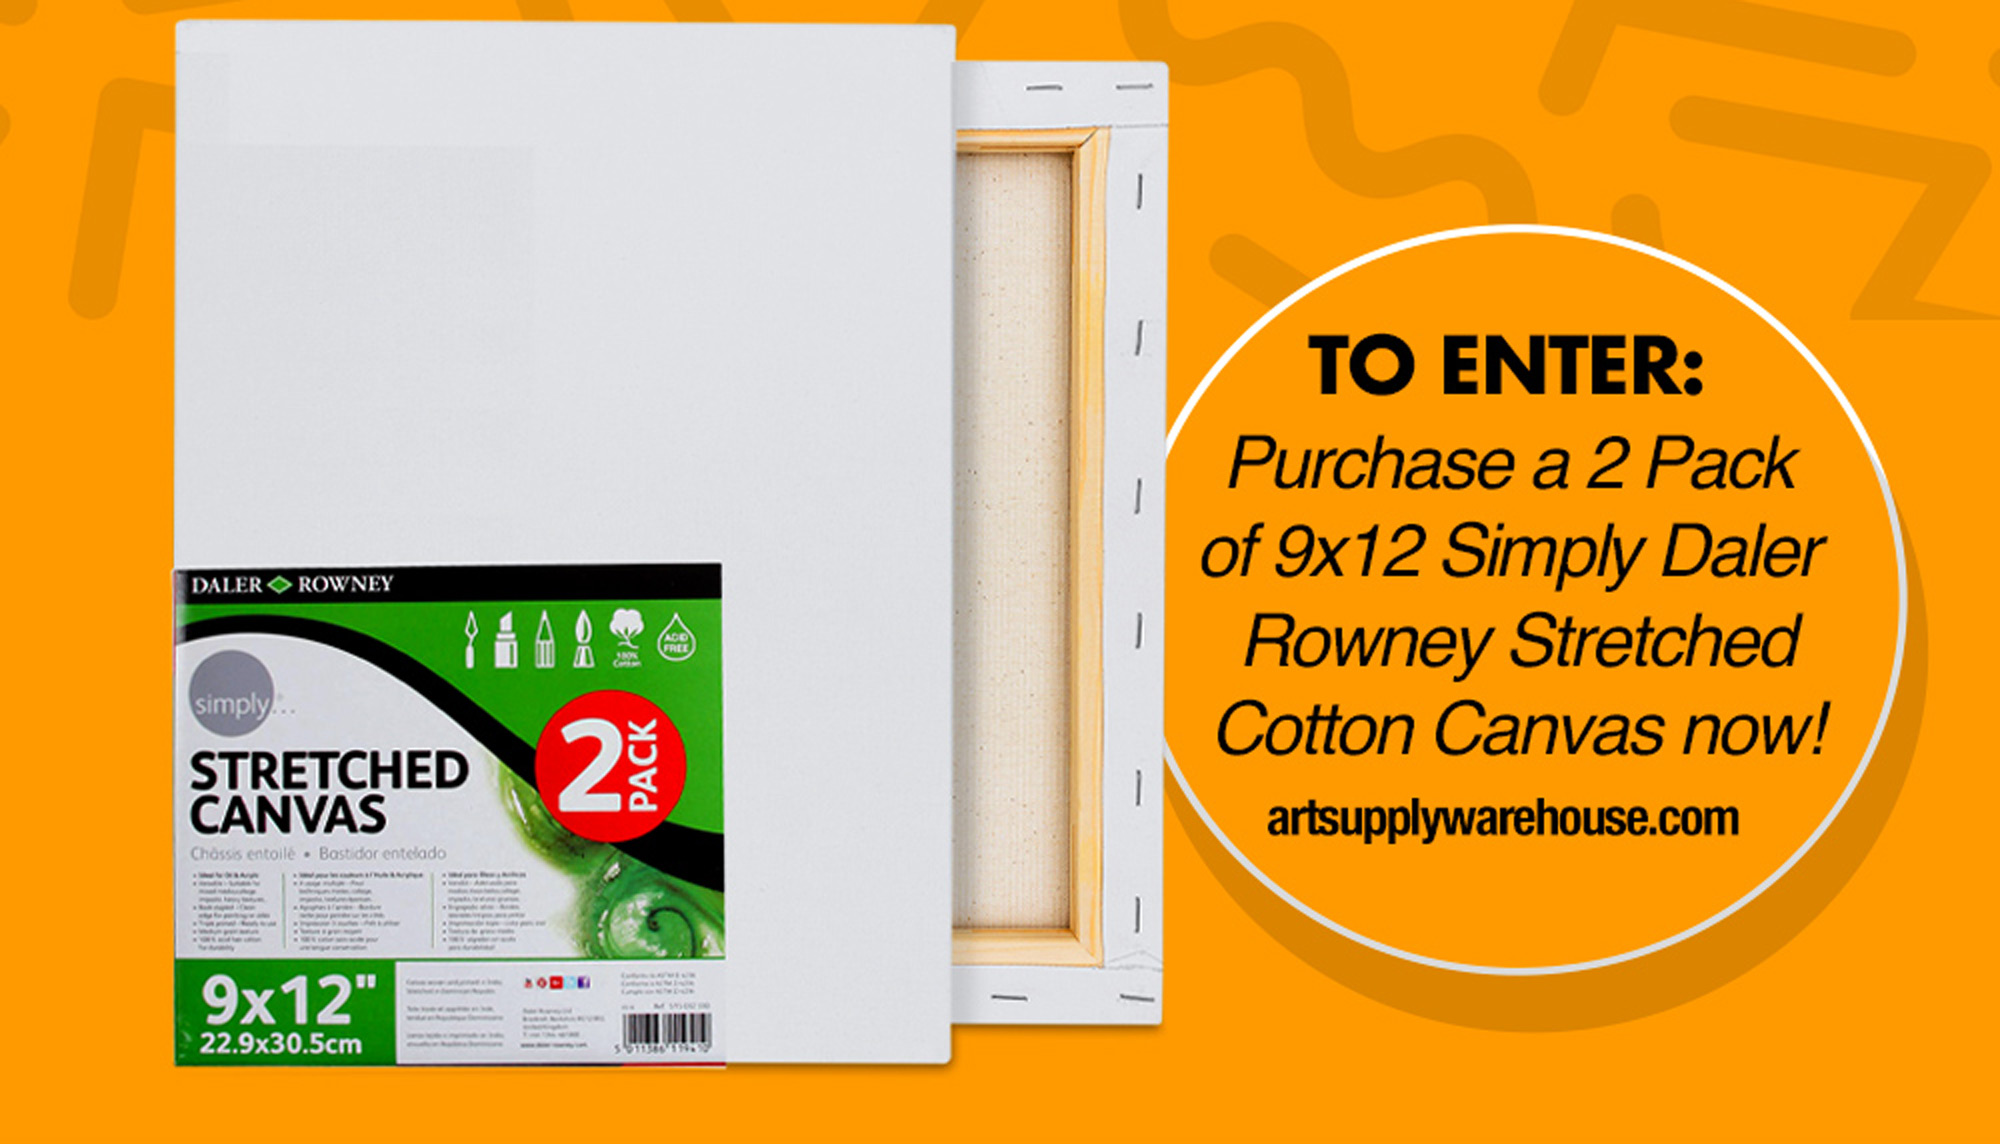 To Enter: Purchase a 2 Pack of 9x12 Simply Daler Rowney Stretched Cotton Canvas now! Click here.